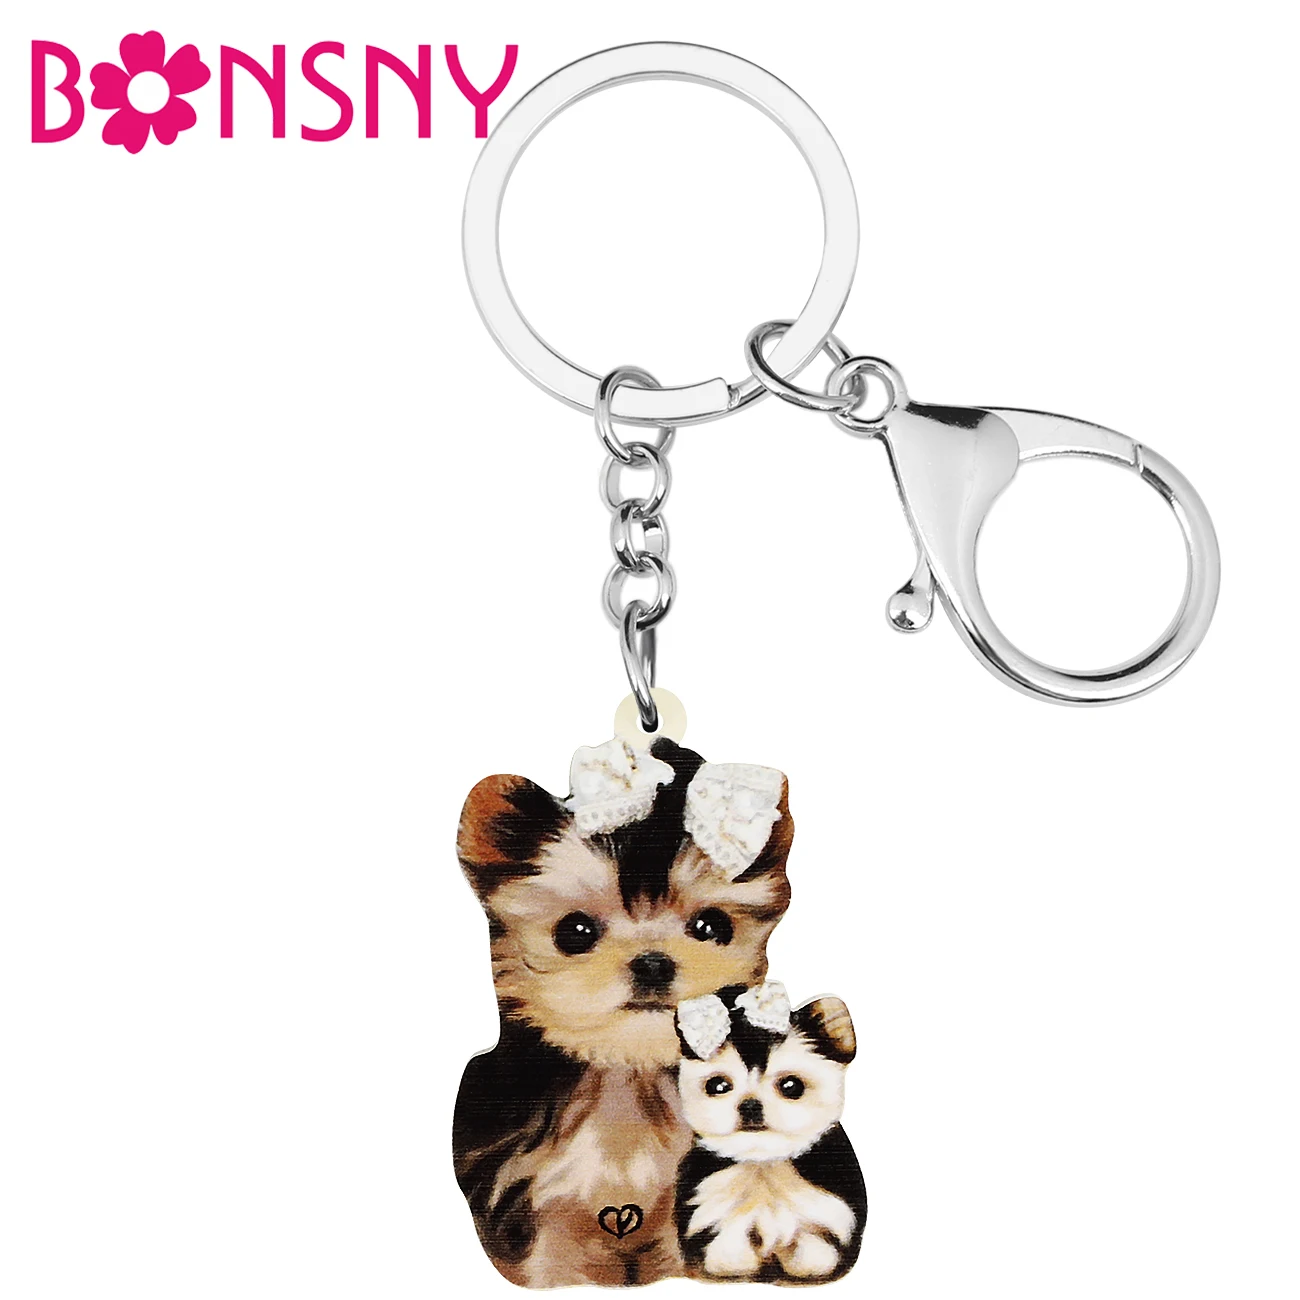 

BONSNY Mother's Day Acrylic Cute Yorkshire Dogs Keychains Ring Fashion Pets Key Chain Jewelry For Women Girls Teens Gifts